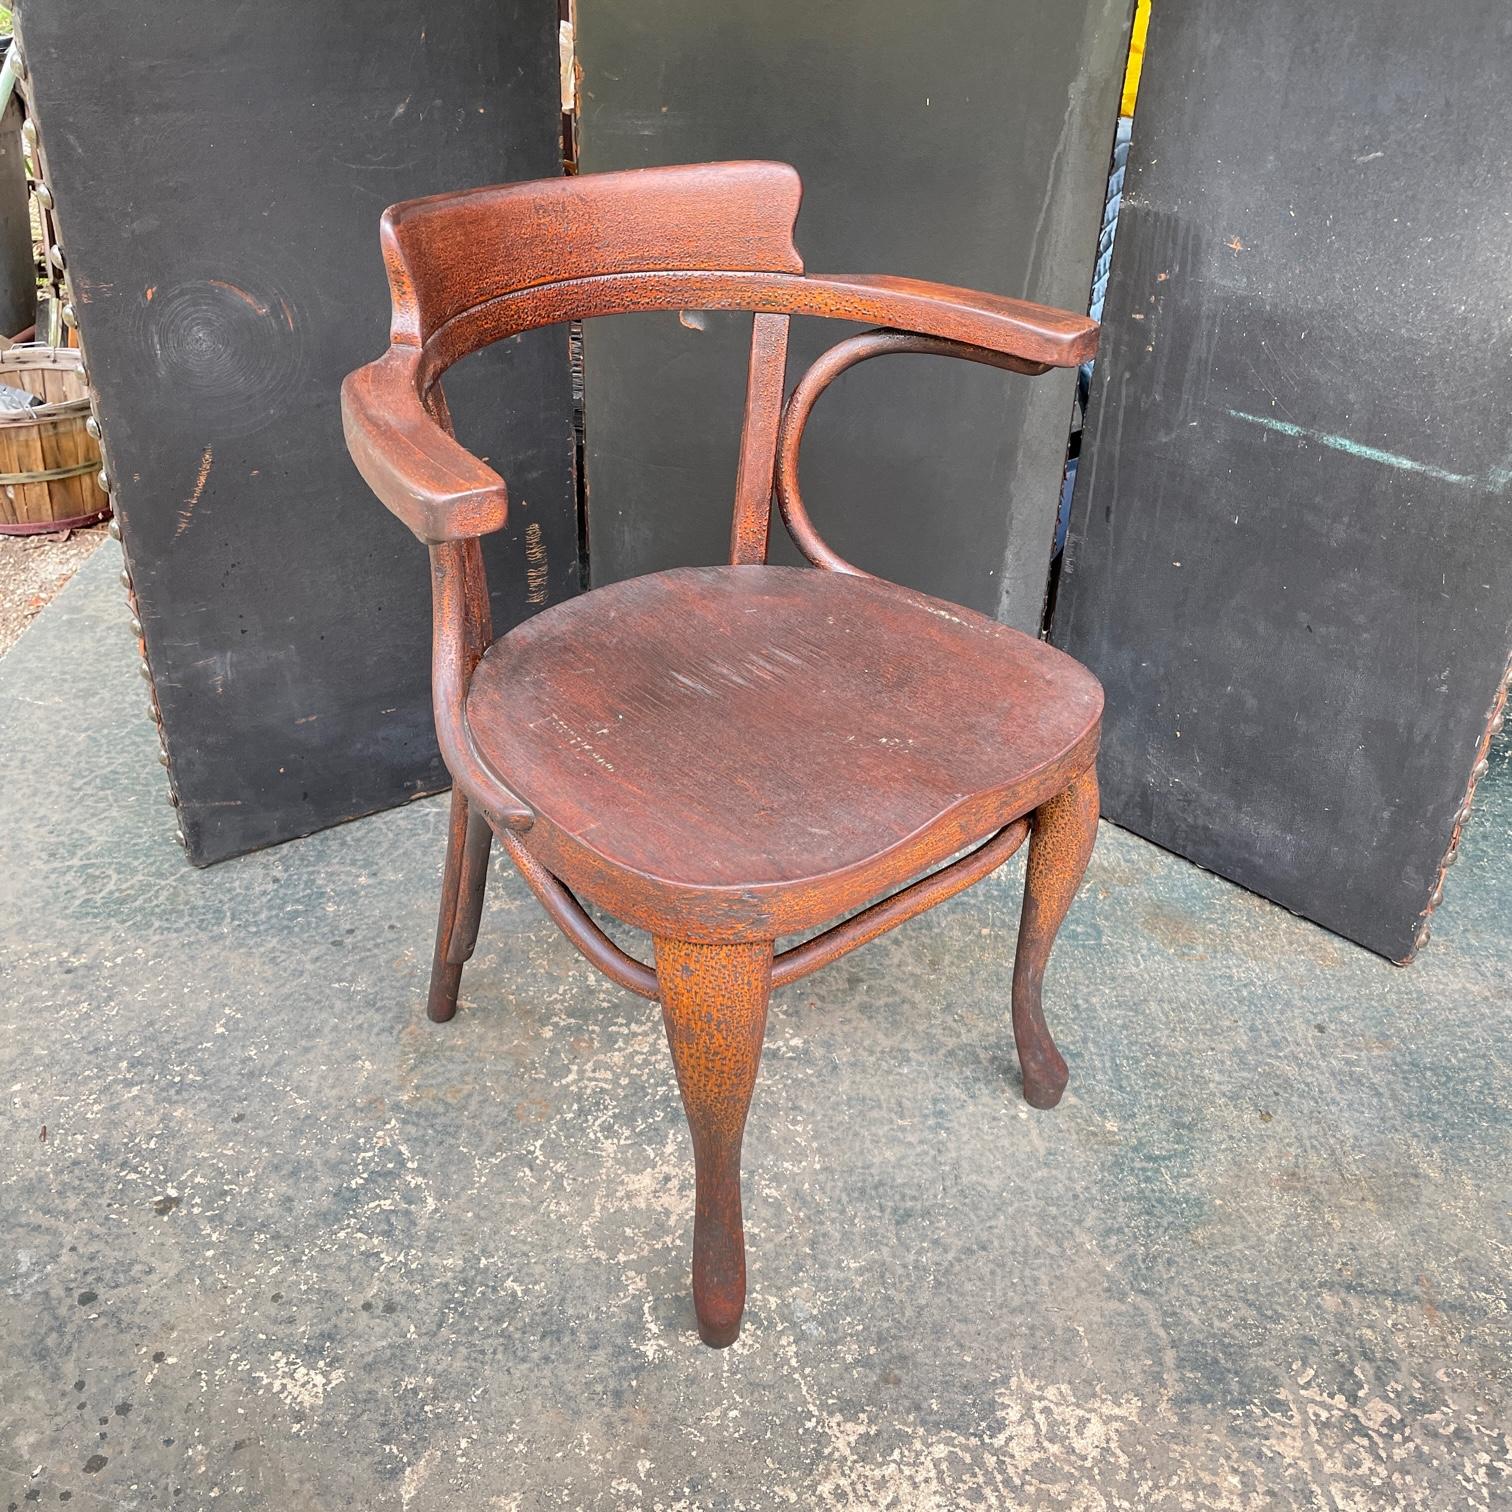 Poor unrestored condition. Secession armchairs, model no. 6150 by Adolf Loos for Thonet, Austria.


W 23 x D 22 x H 31.5 in.
Arm Height: 25 in.
Seat Height: 18.5 in.